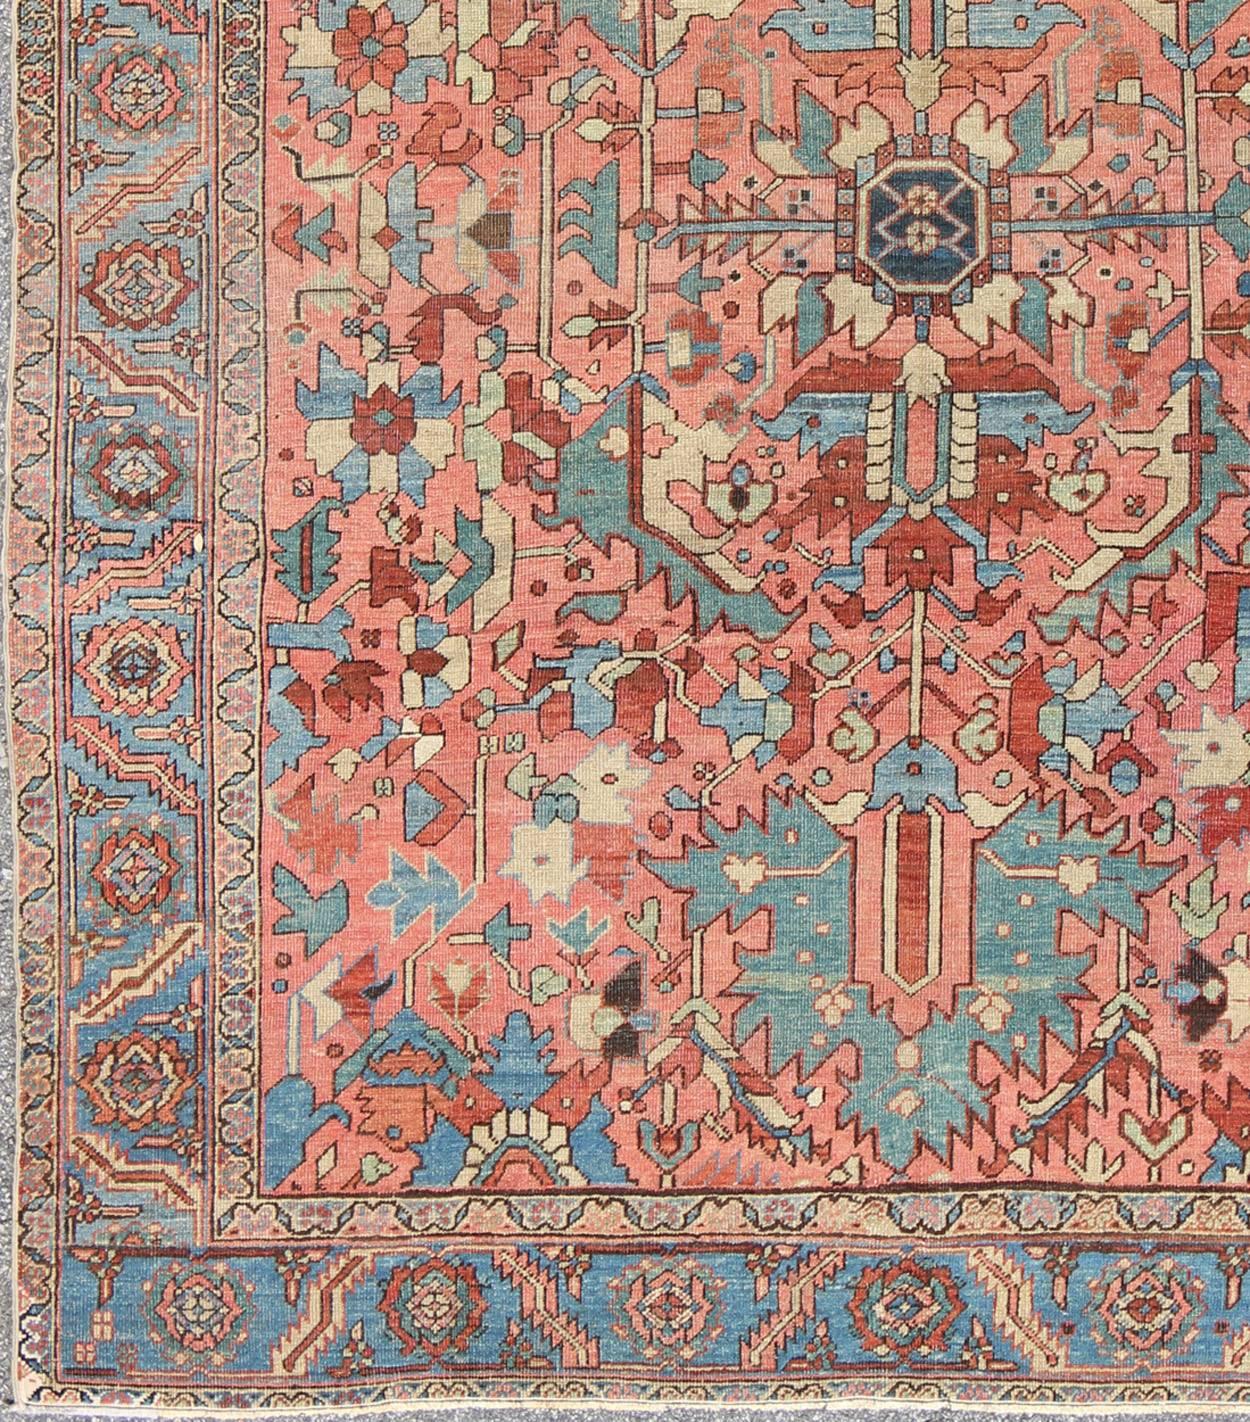 Antique Serapi geometric all over design rug from Persia, rug D-0519, country of origin / type: Iran / Serapi, circa 1900

This impressive turn-of-the-19th-century Persian Serapi rug displays a striking all-over large scale geometric design with